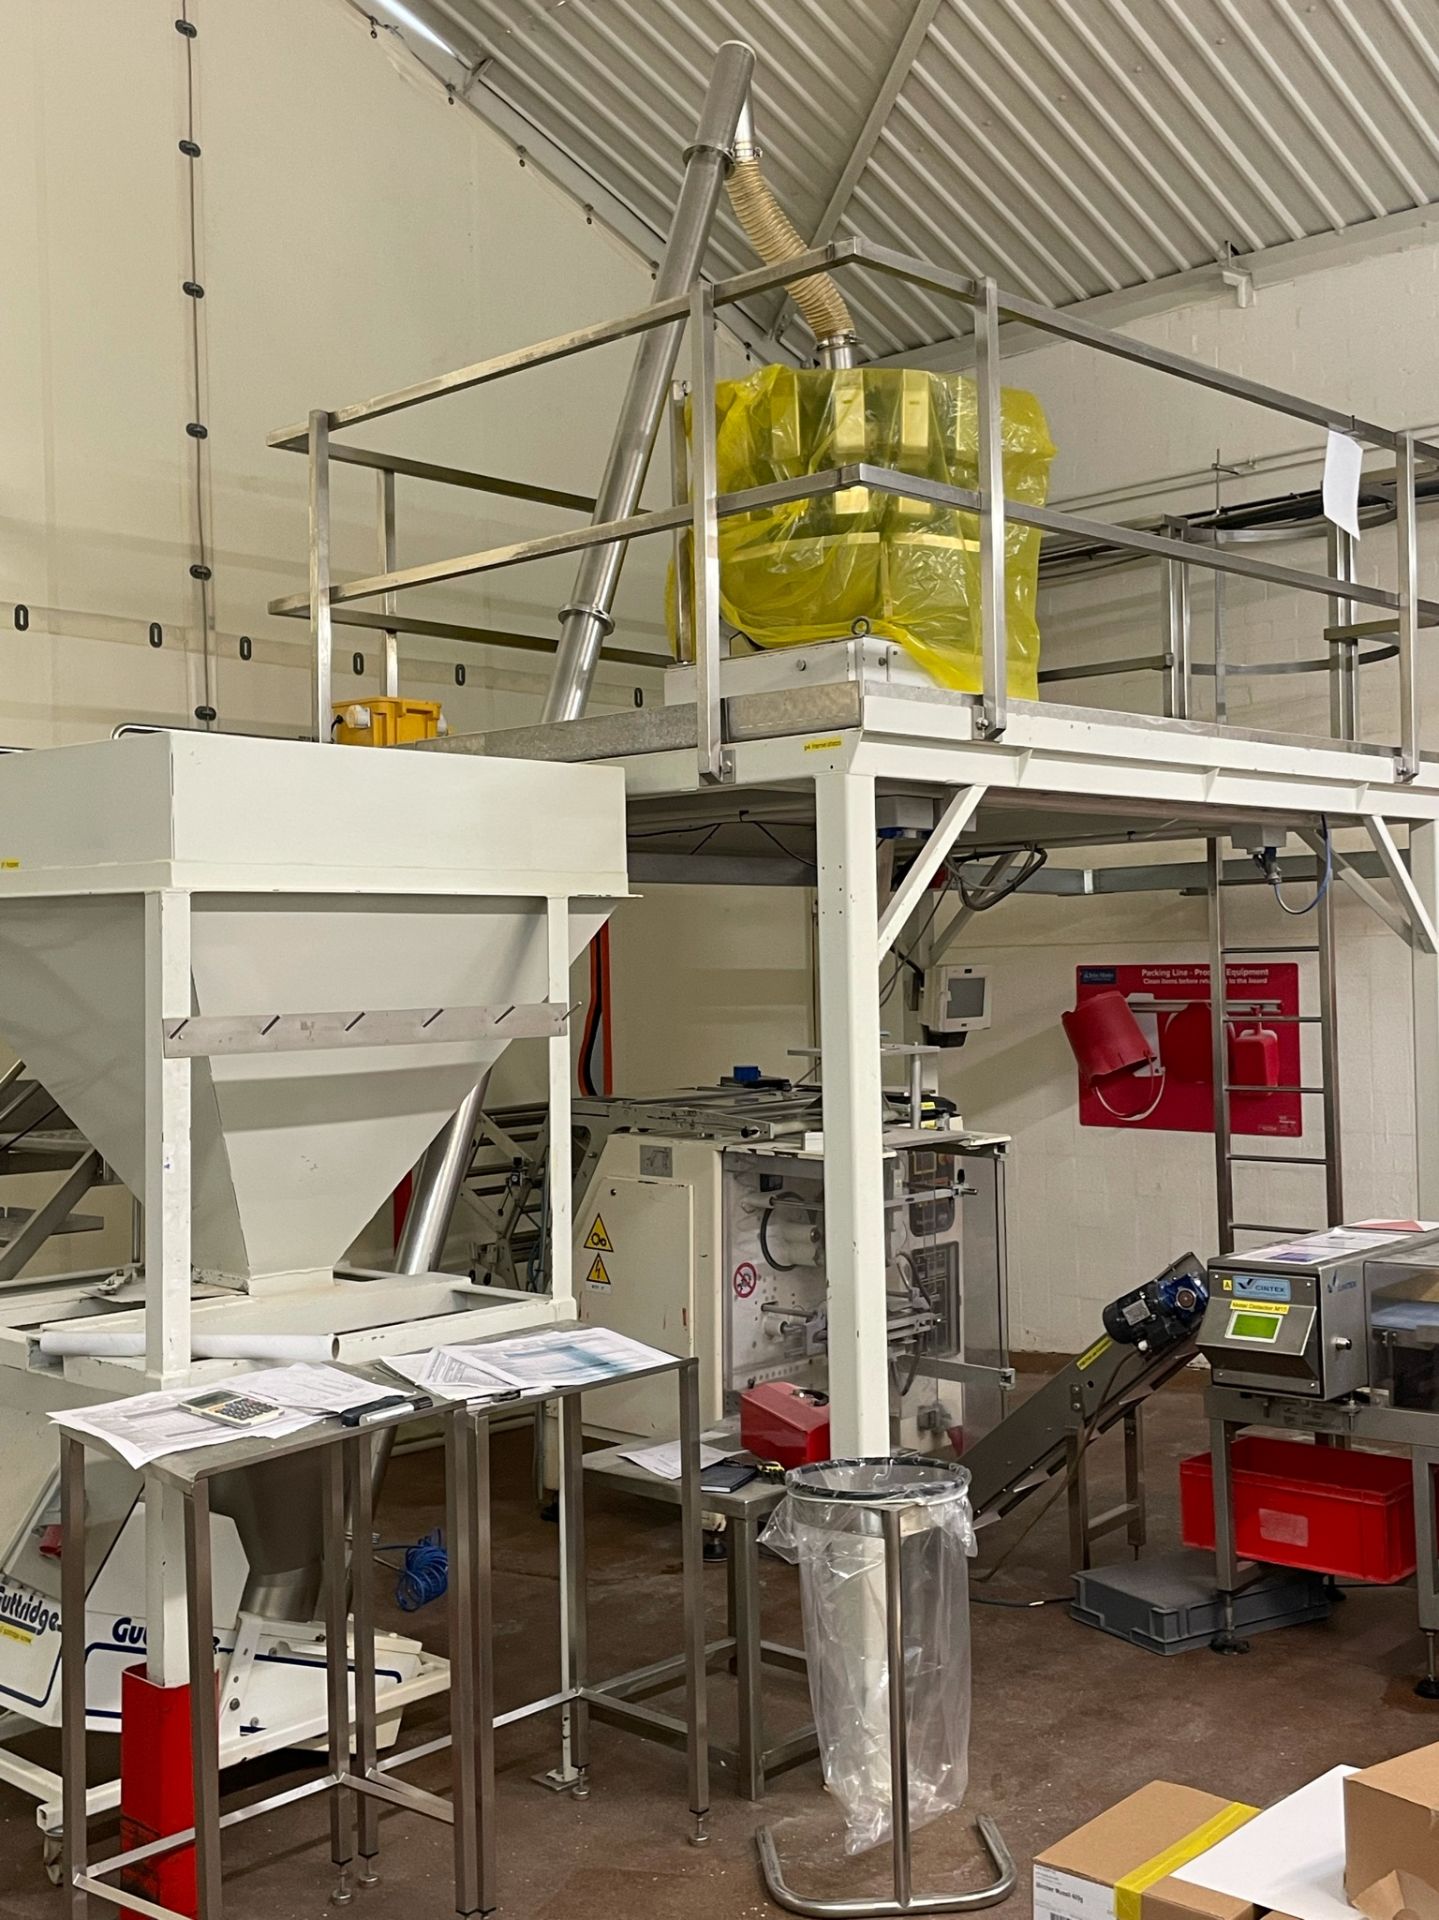 Ishida Multi-Head Weigher, on gantry, item located in Bury St Edmunds, lift out charge - £200 (